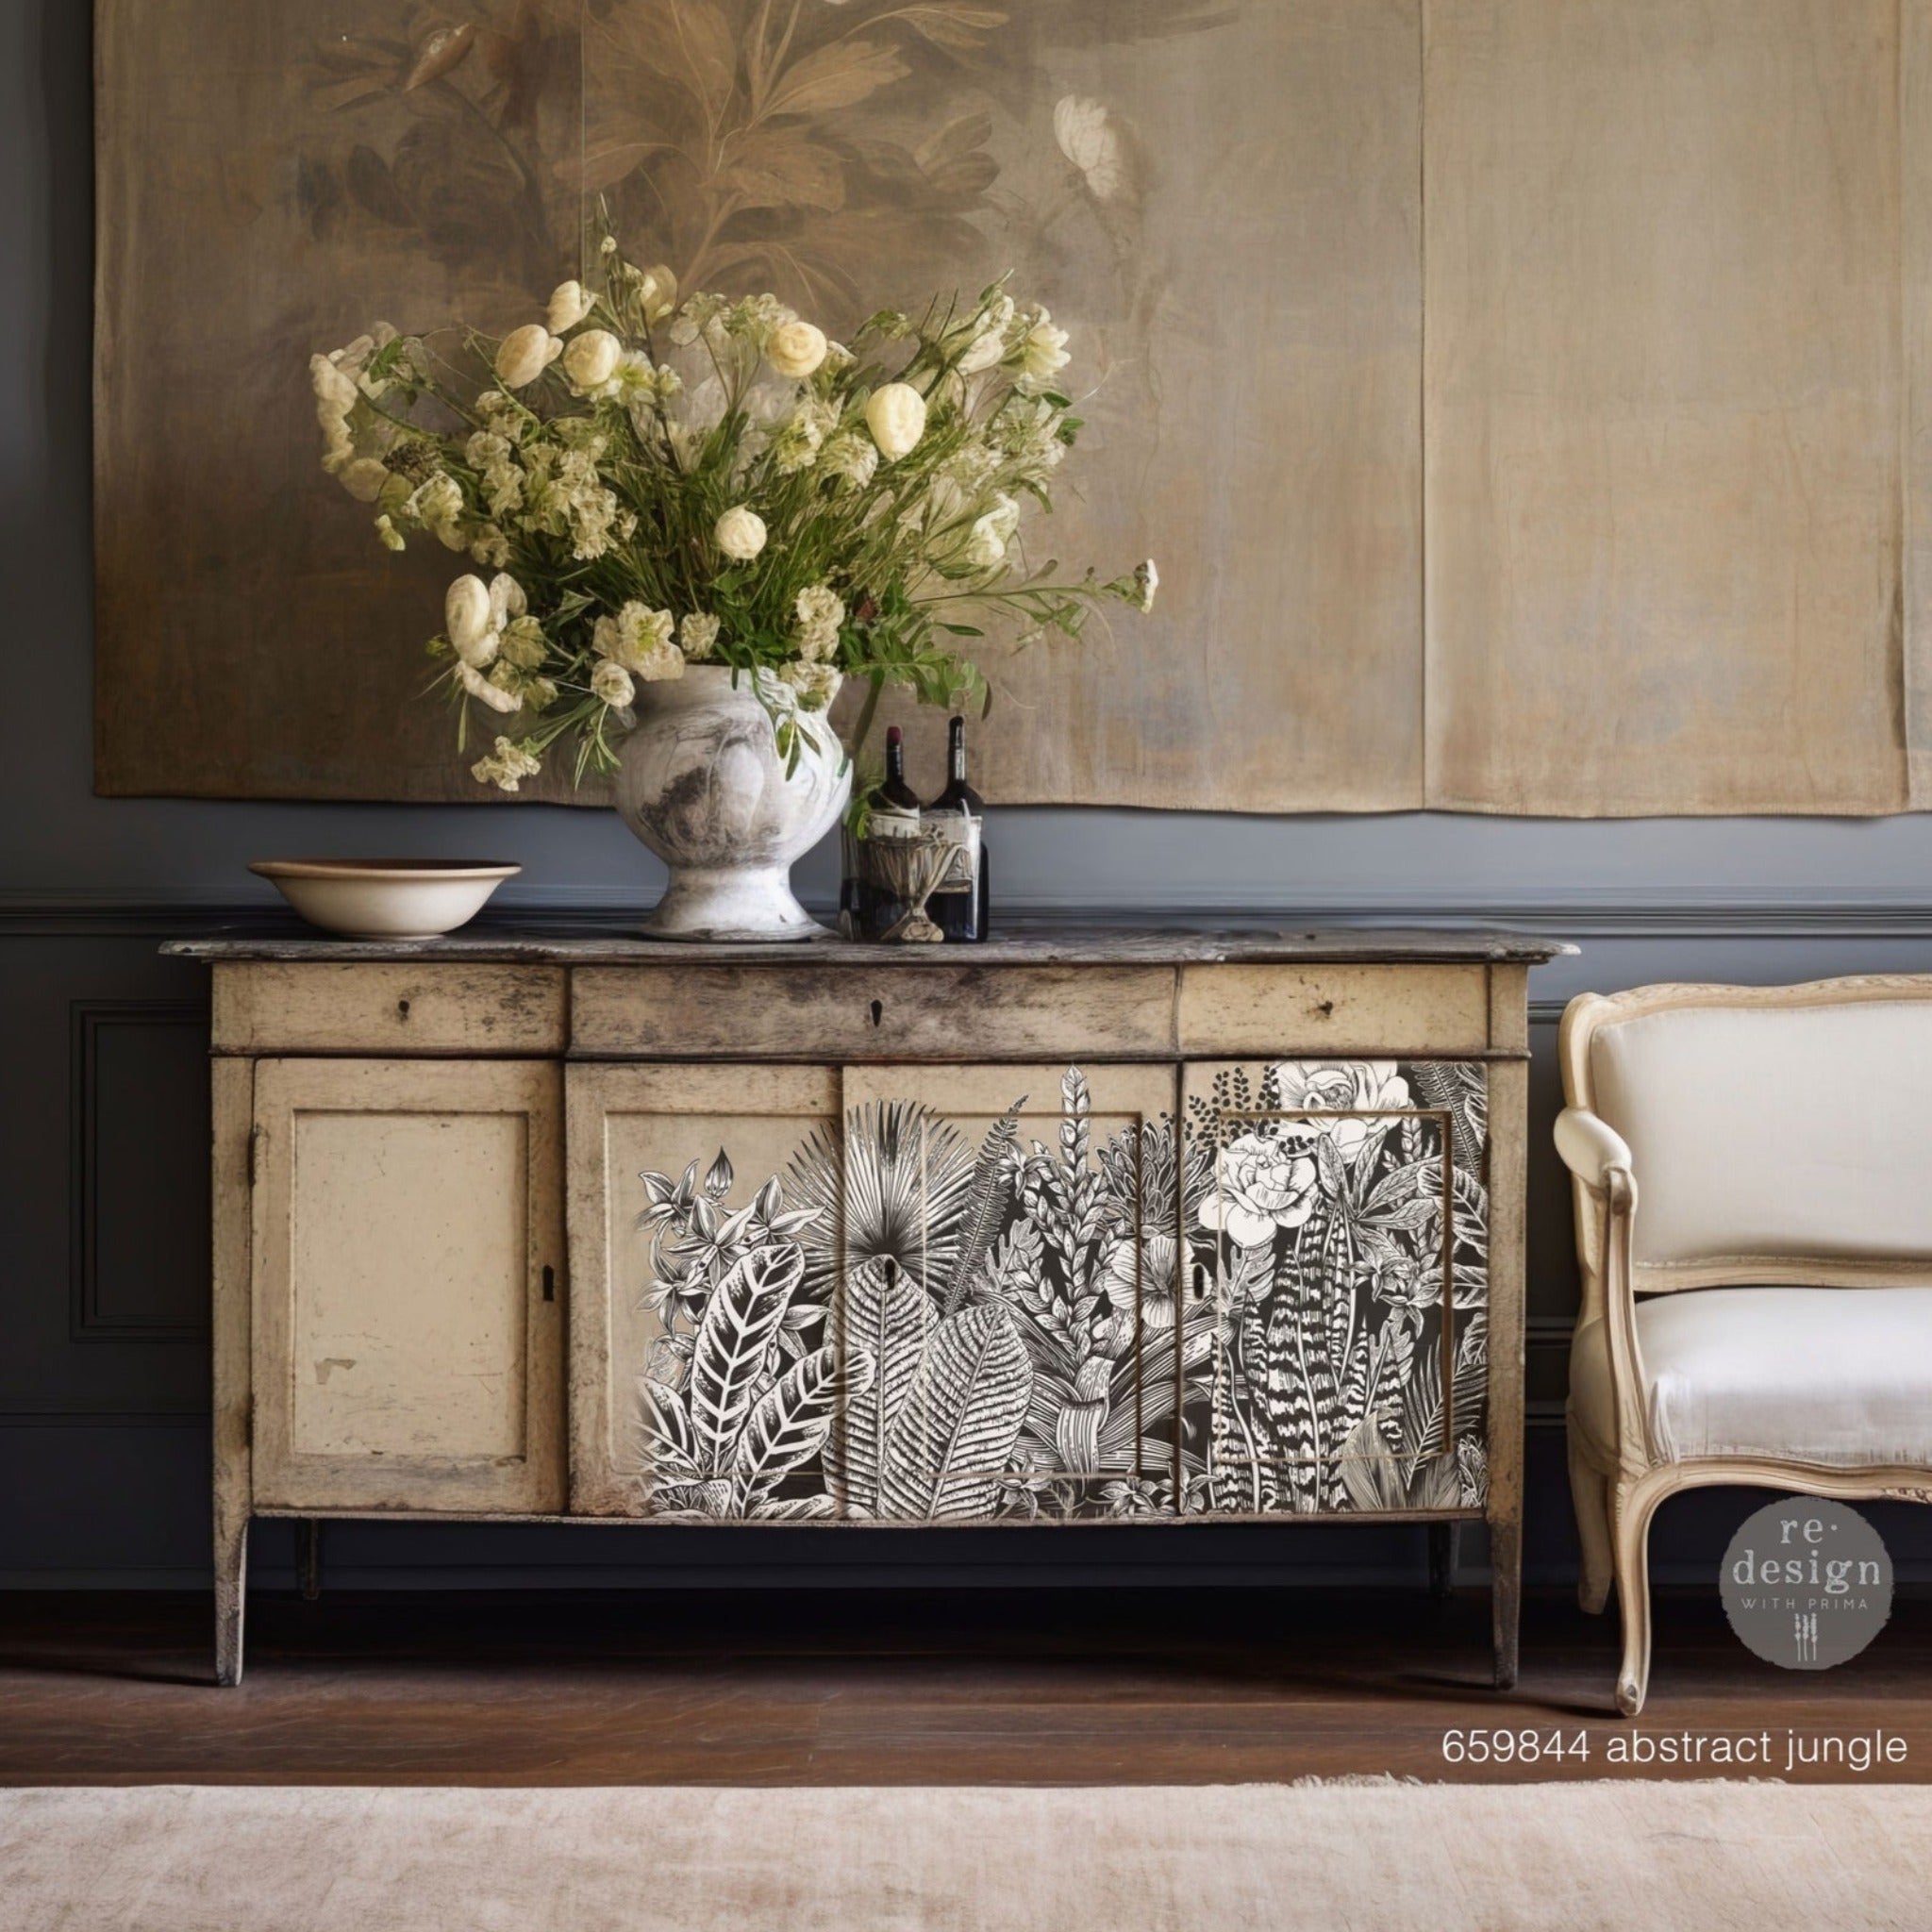 A vintage console table is light beige with distressing and features ReDesign with Prima's Abstract Jungle transfer on 3 of its 4 storage doors.